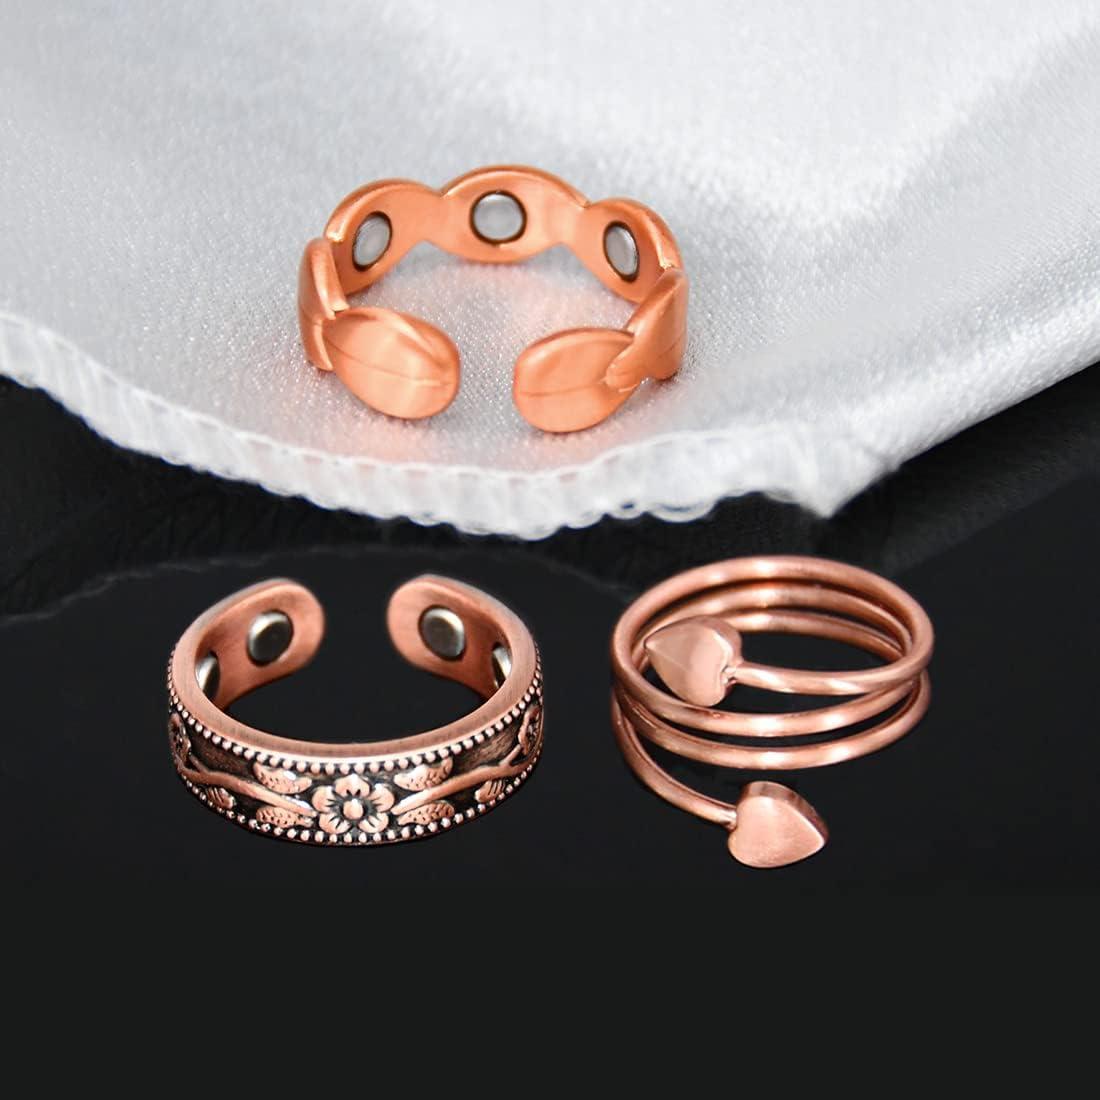 Copper Ring CR105 - Size 8 - 1 inch long. -CR105-8